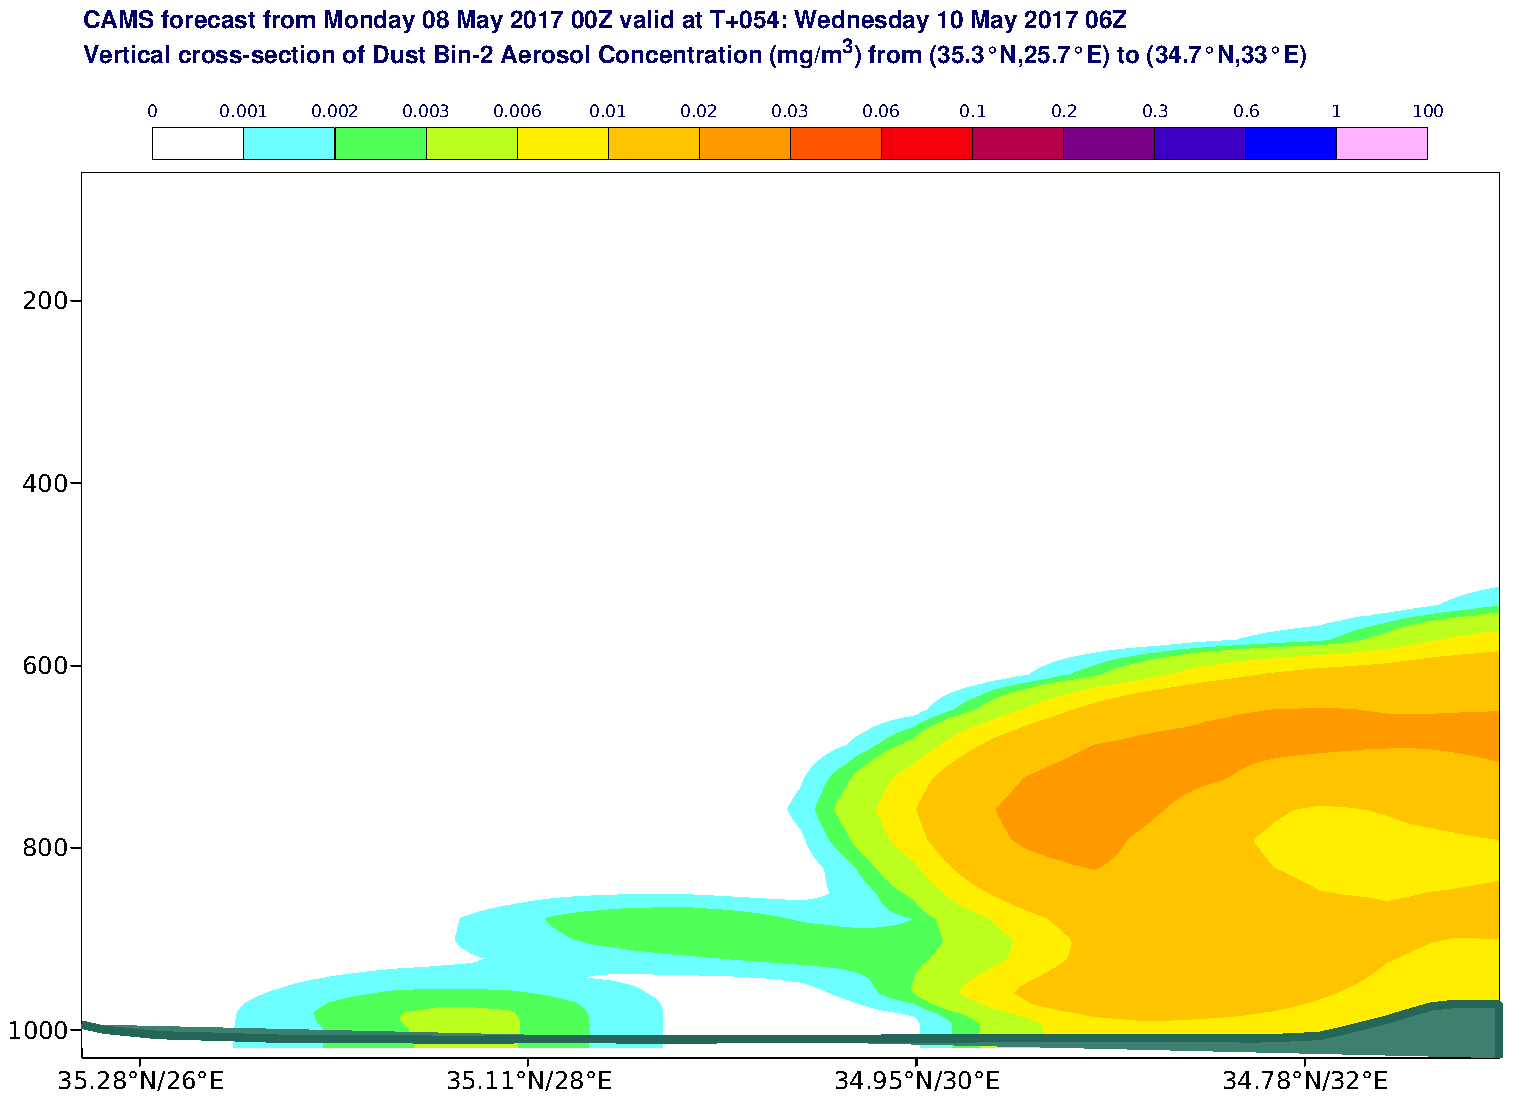 Vertical cross-section of Dust Bin-2 Aerosol Concentration (mg/m3) valid at T54 - 2017-05-10 06:00